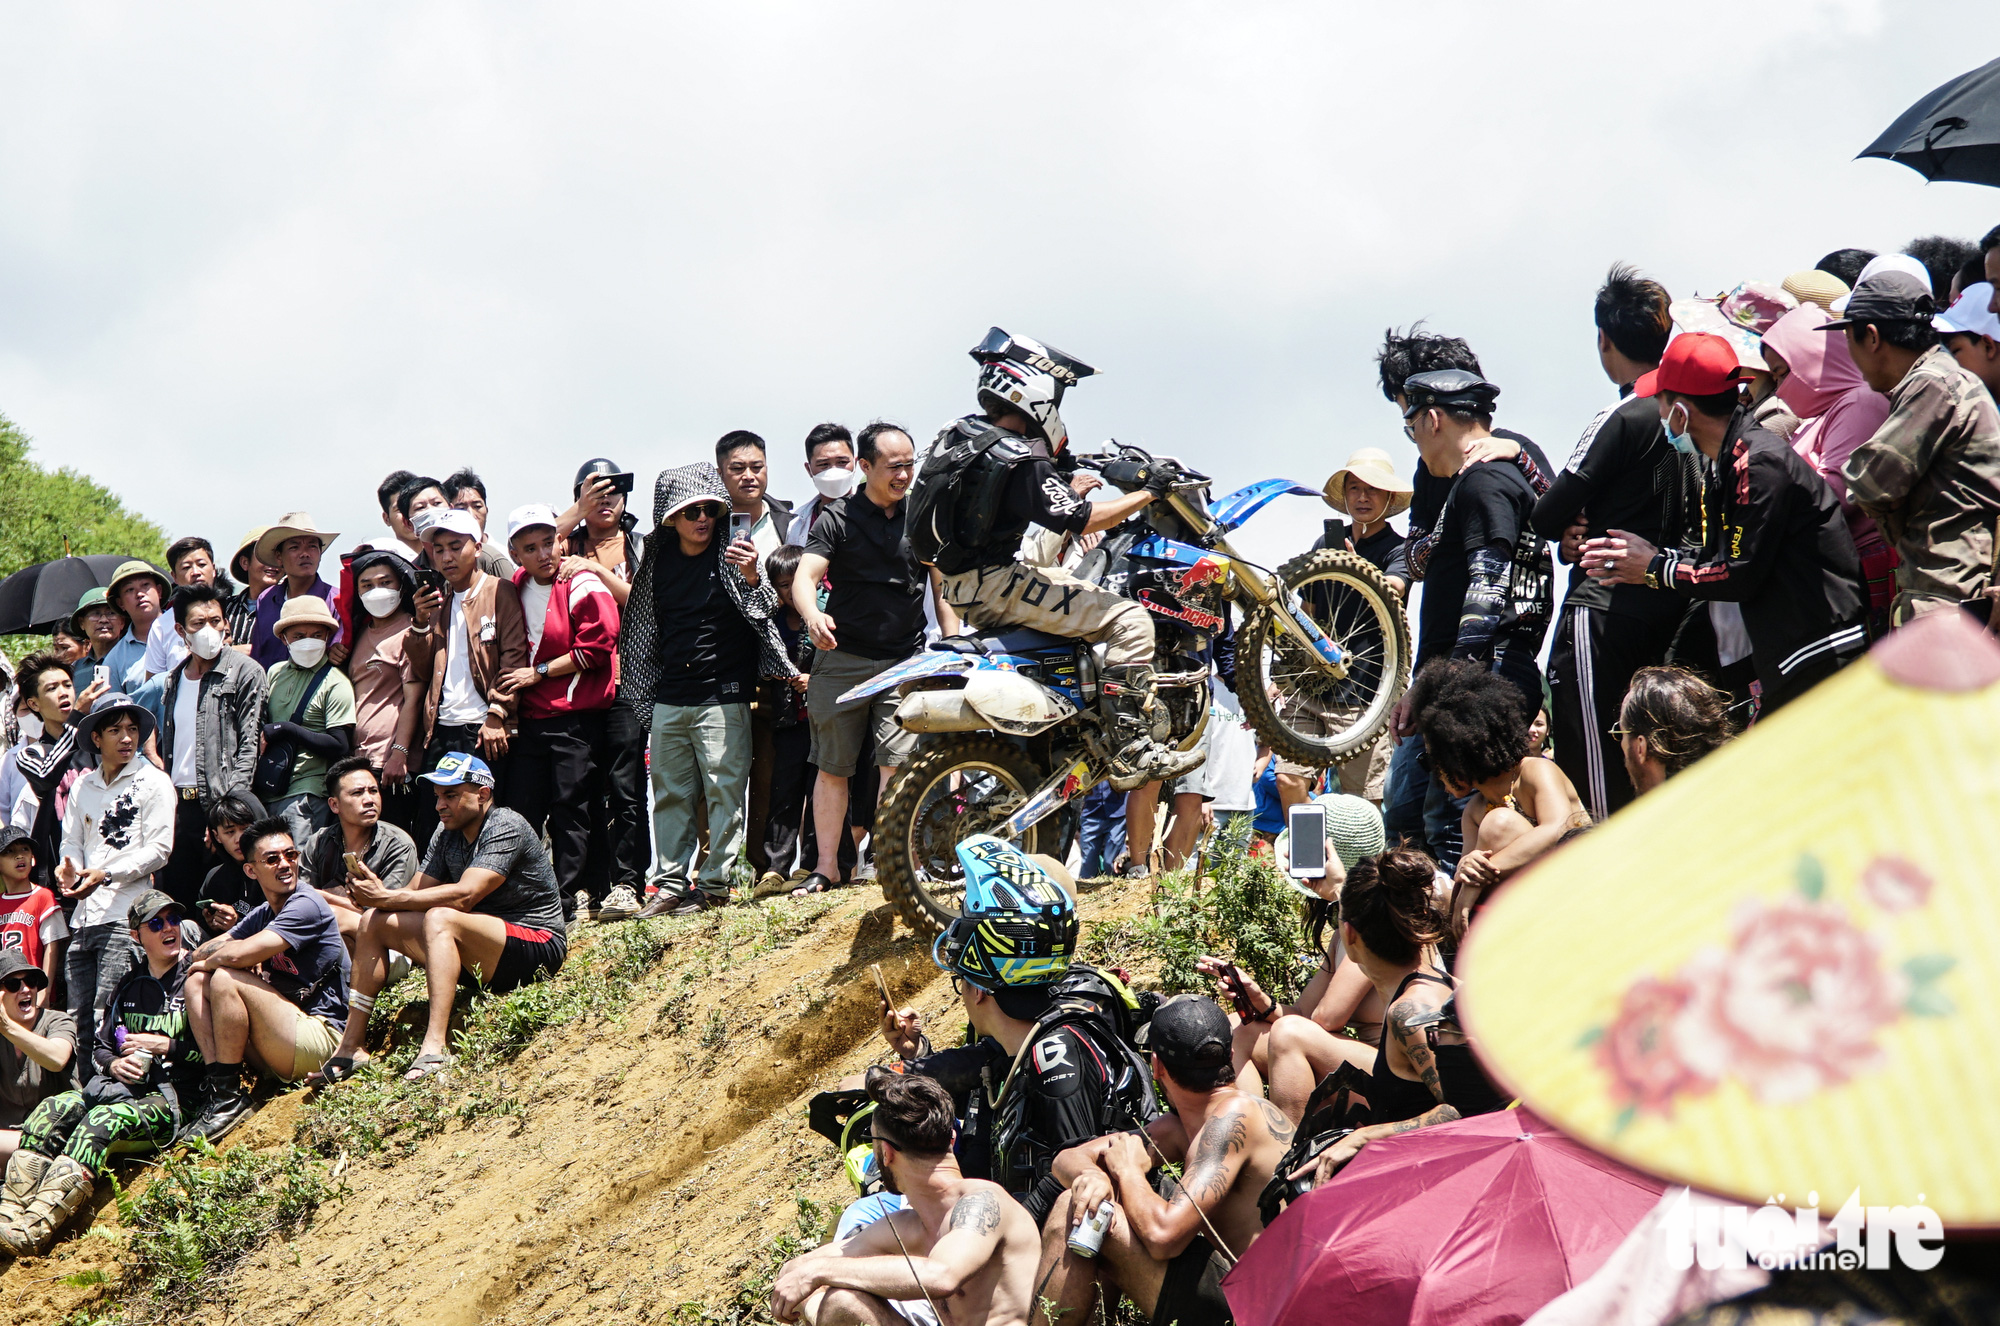 Spectators watch a rider racing in the final race of the 2023 VTV Cab - Off road motorcycle racing tournament in Van Ho District, Son La Province, Vietnam, May 28, 2023. Photo: Nguyen Hien / Tuoi Tre